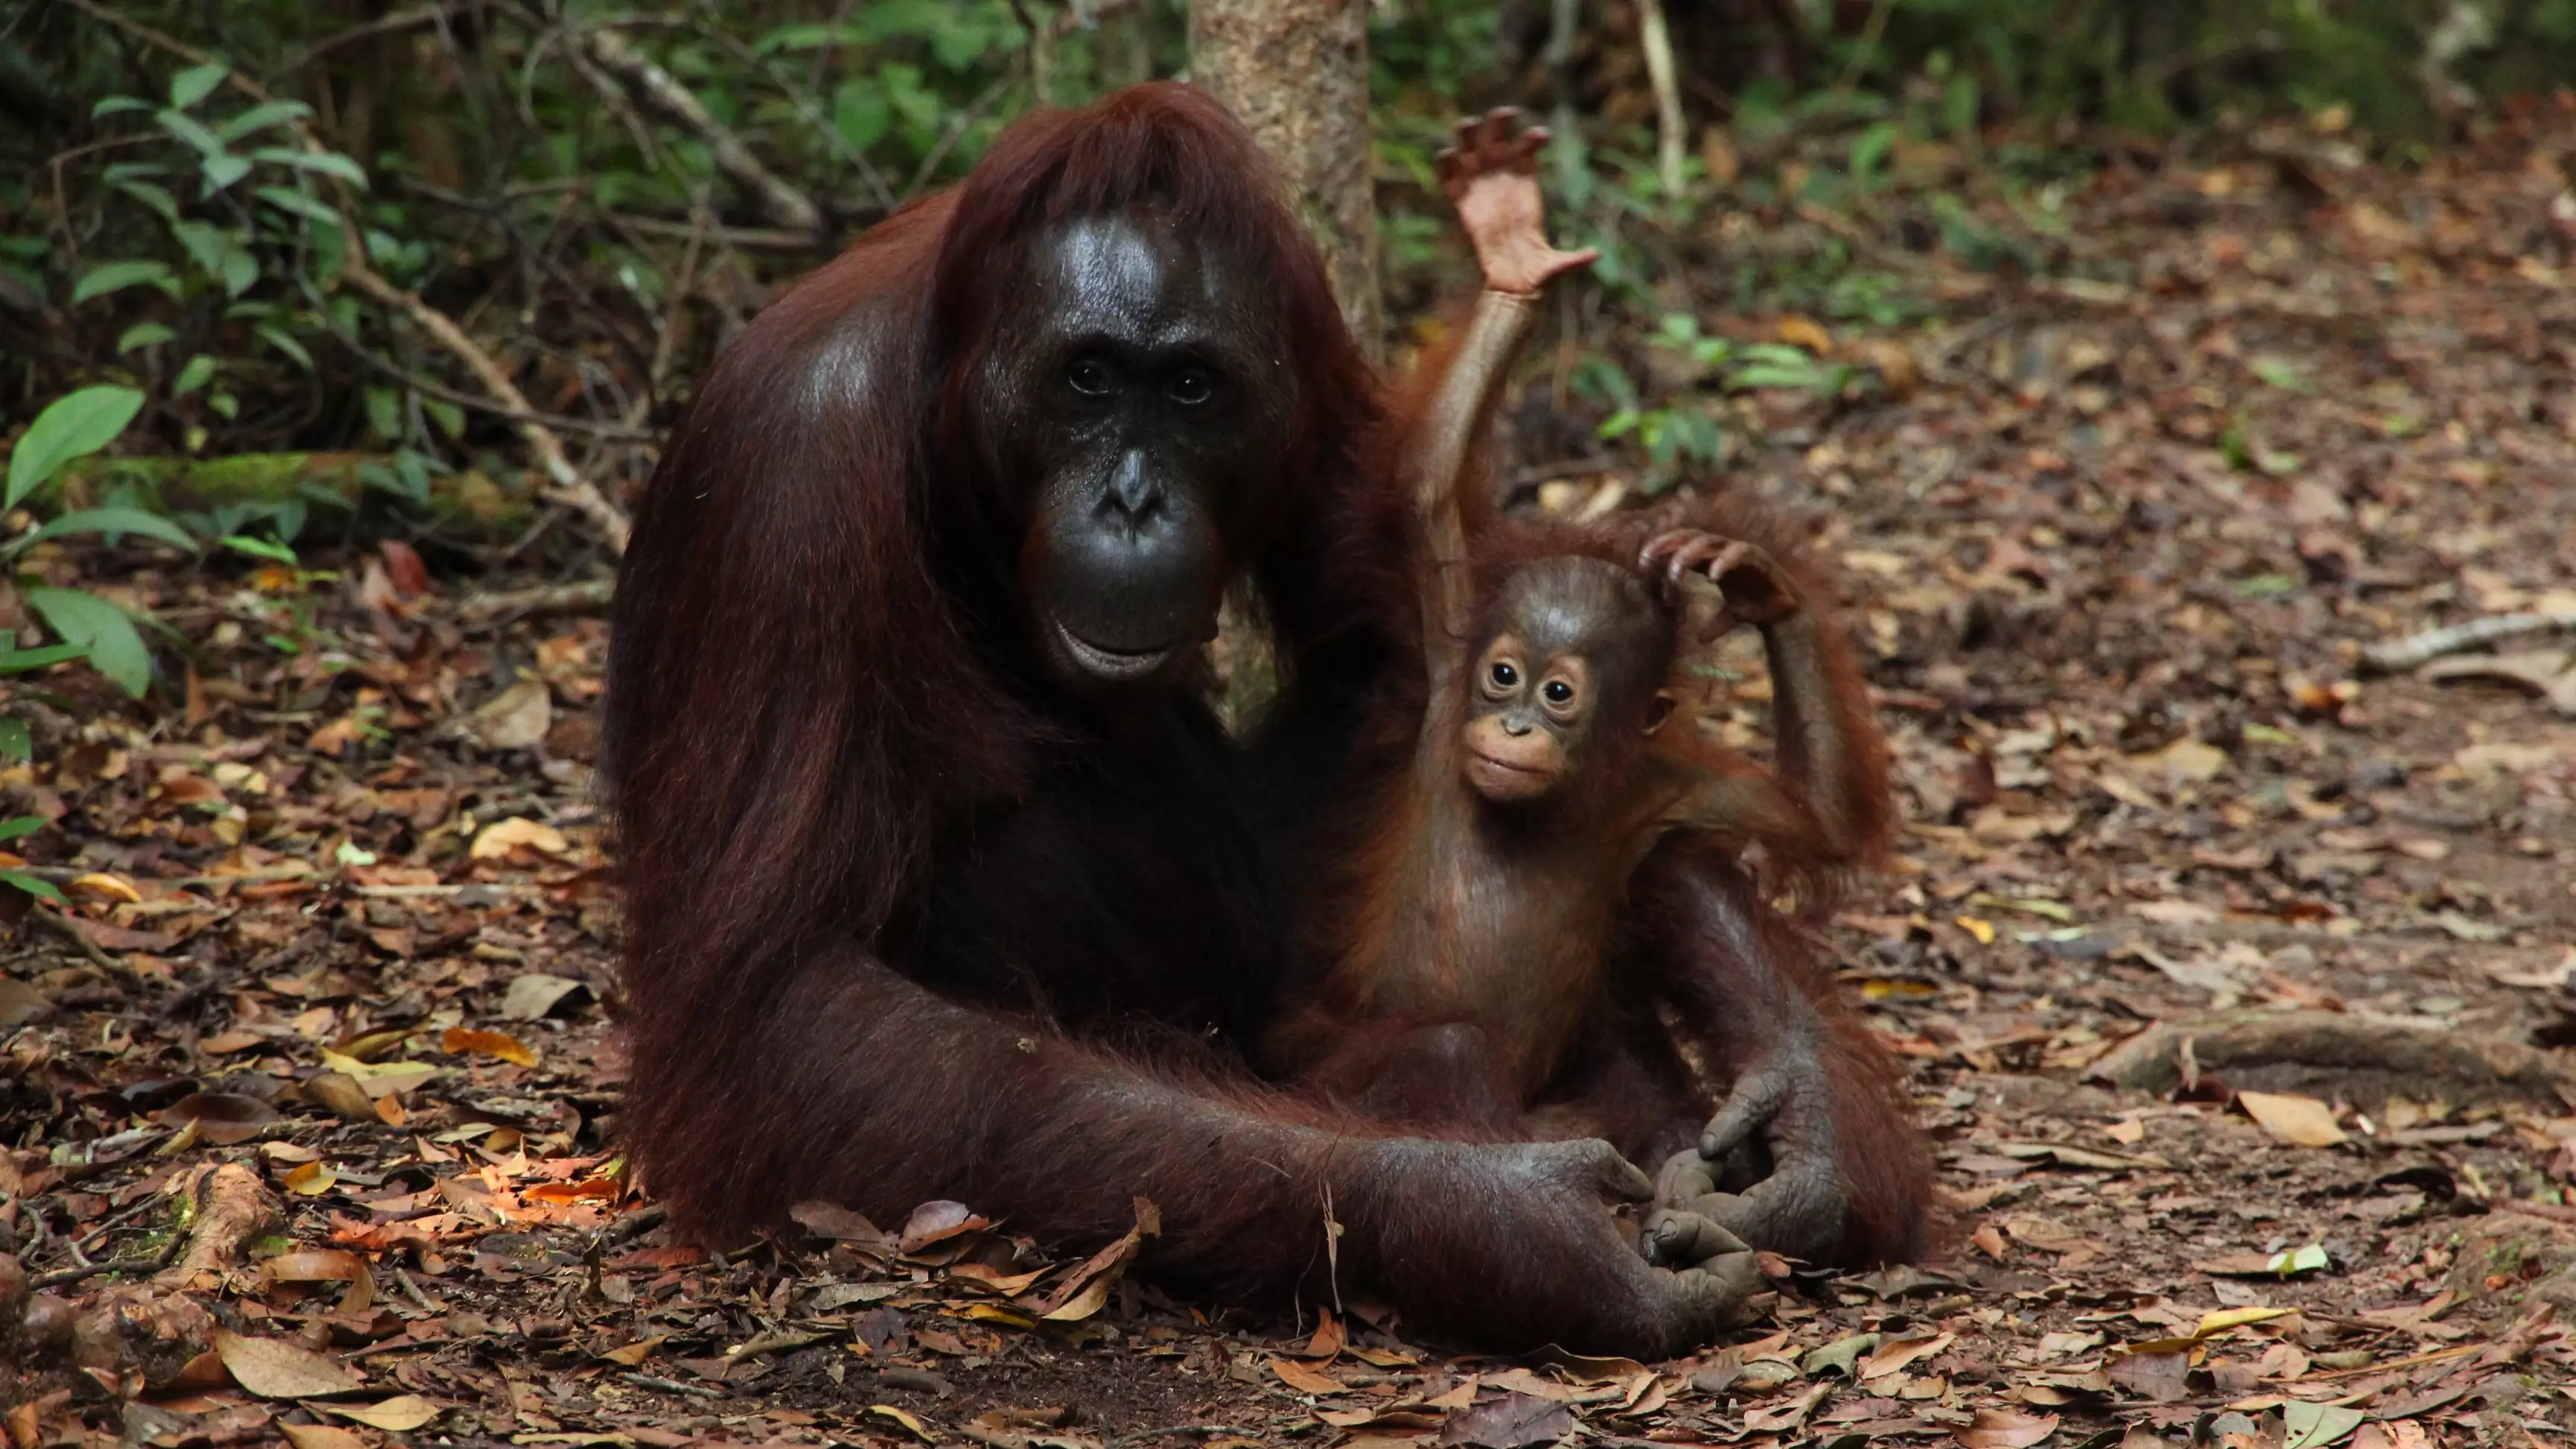 Orangutang Numbers Have Dropped By Up To 30 Per Cent in Palm Oil Estates